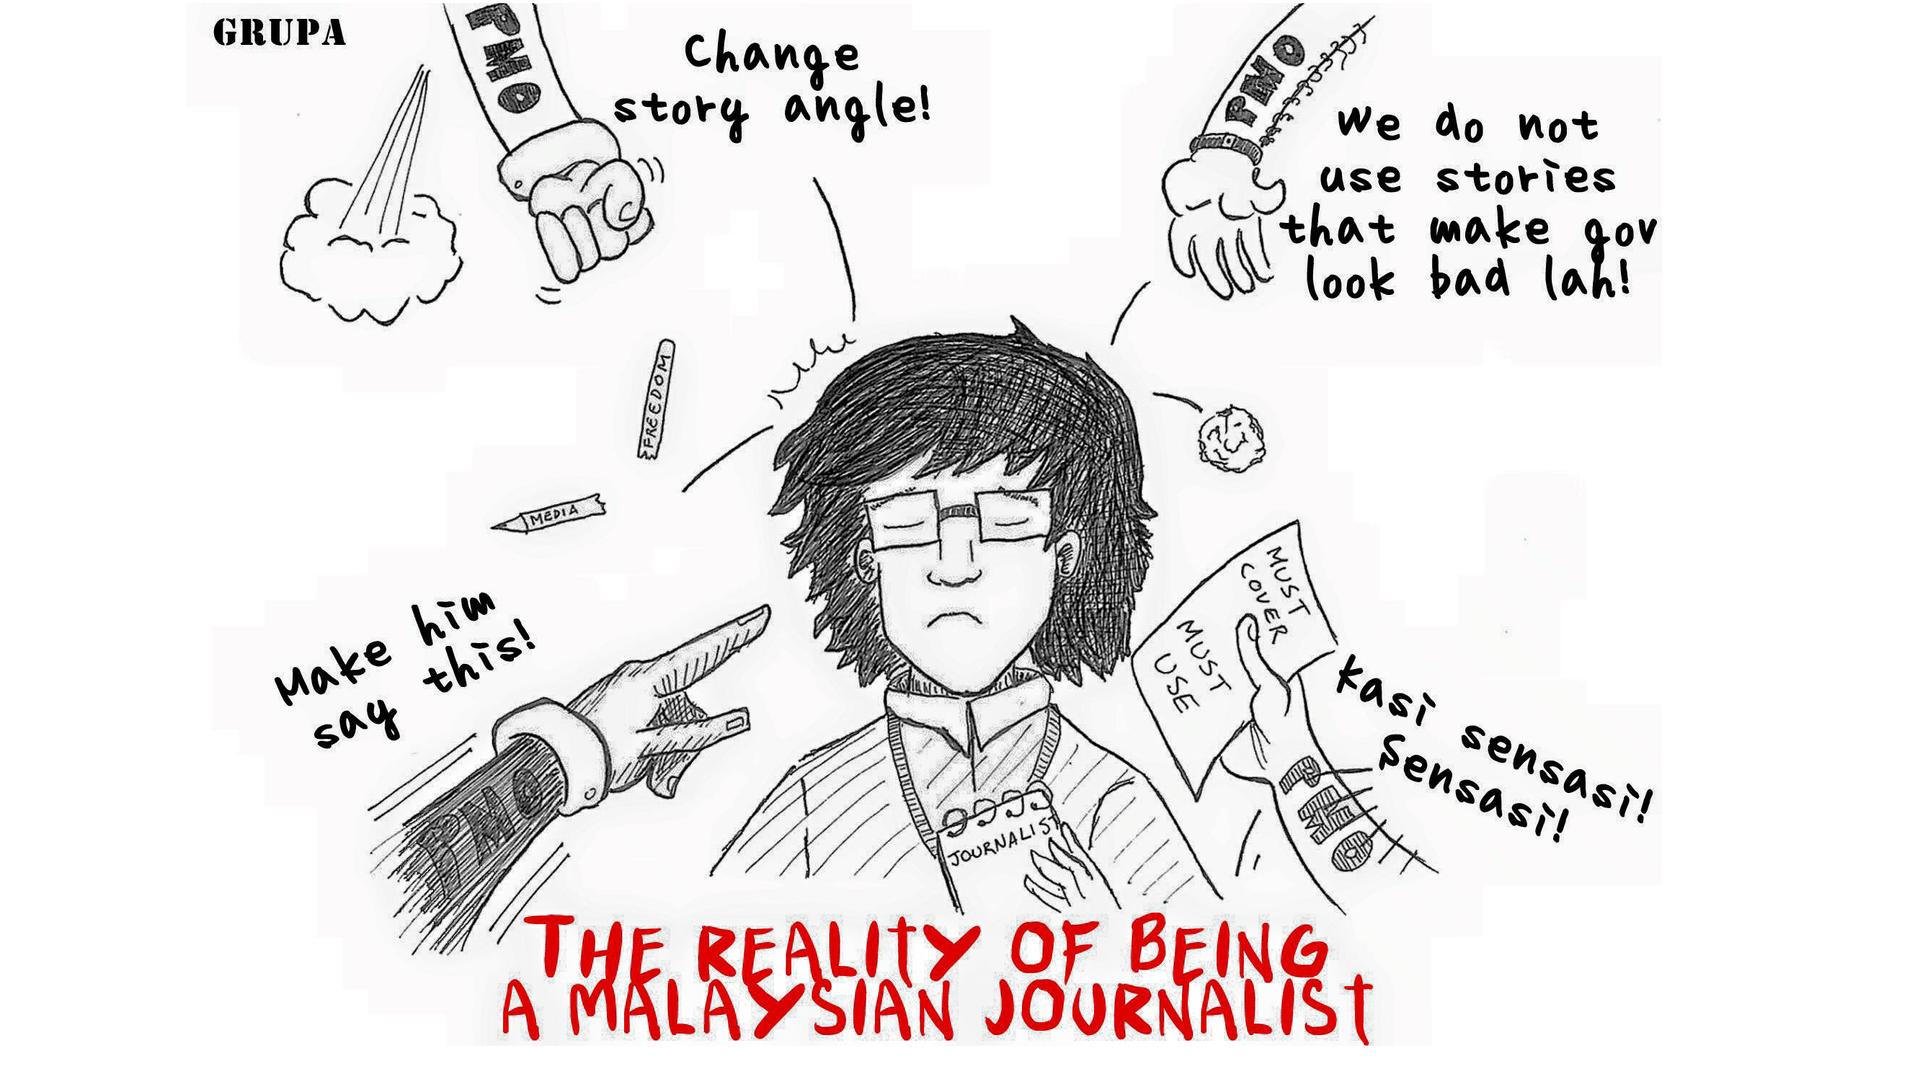 GRUPA makes comics about the state of press freedom in Malaysia.